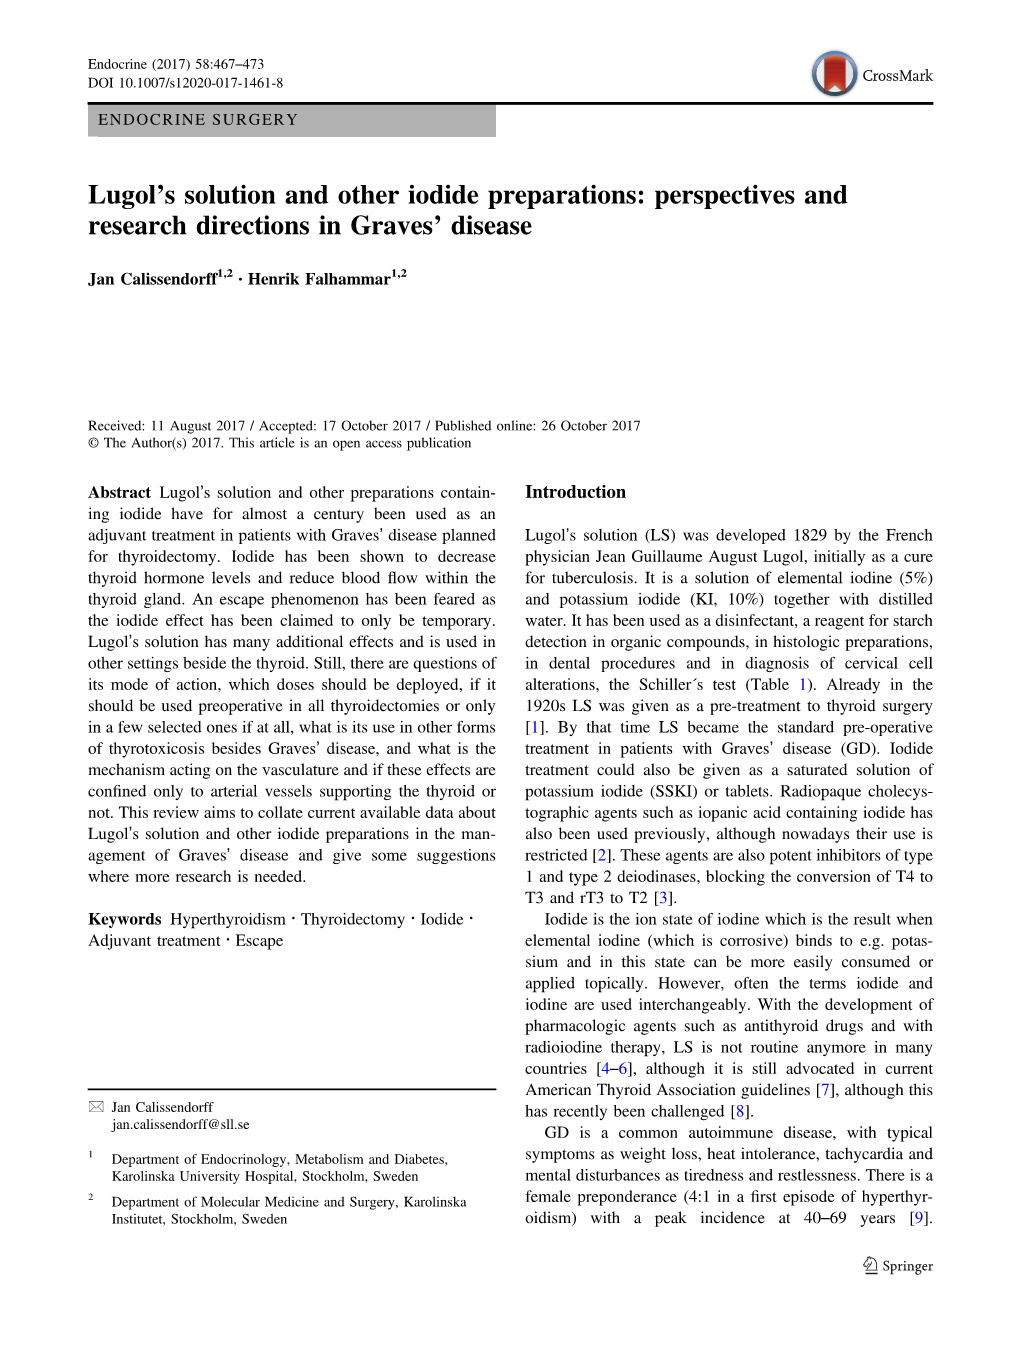 Lugol's Solution and Other Iodide Preparations